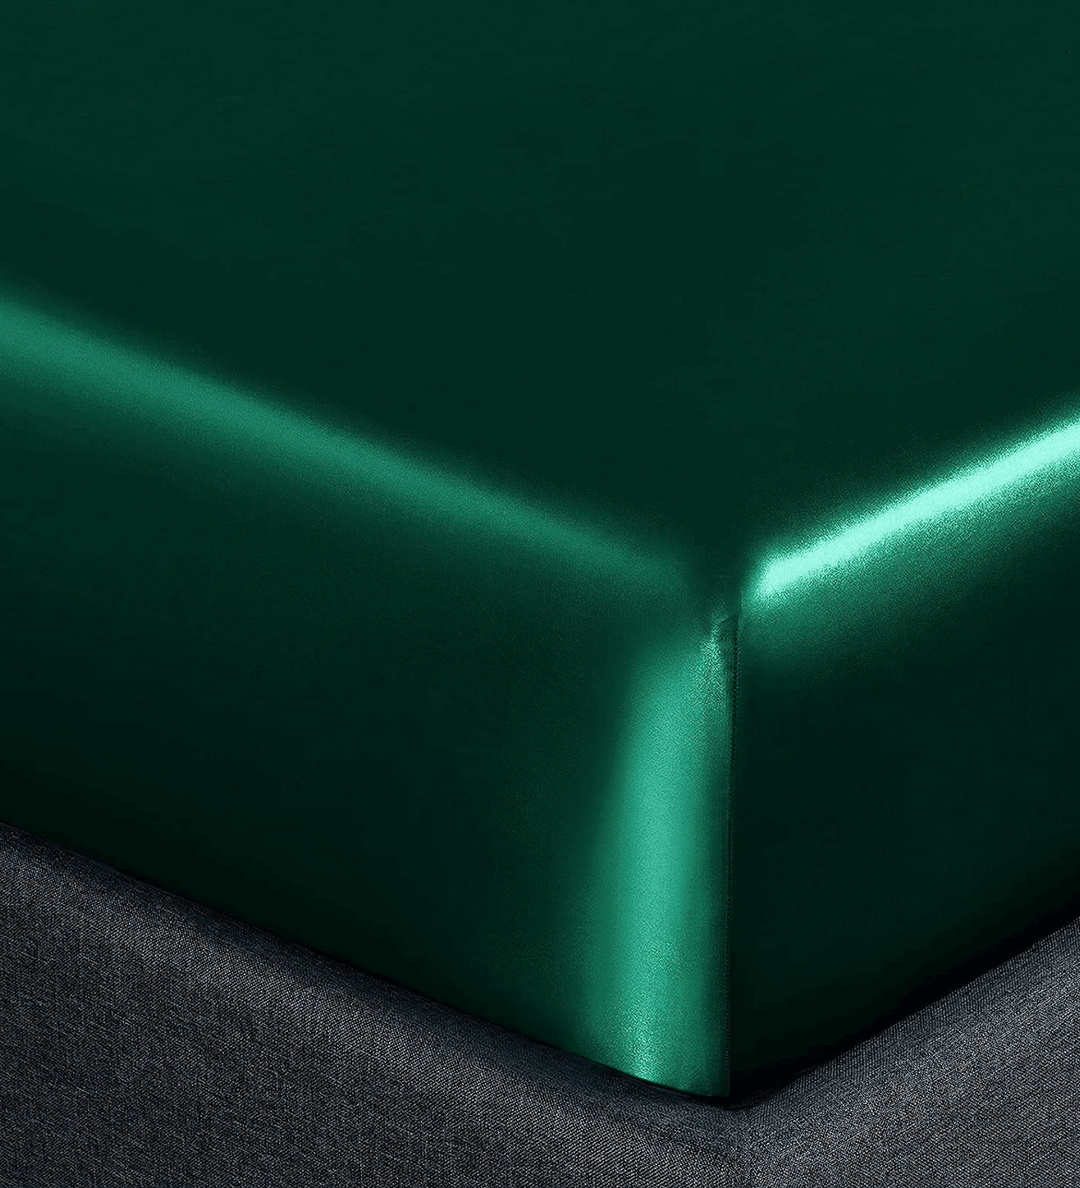 Green Satin Elastic Fitted Sheet with 2 Pillow Covers